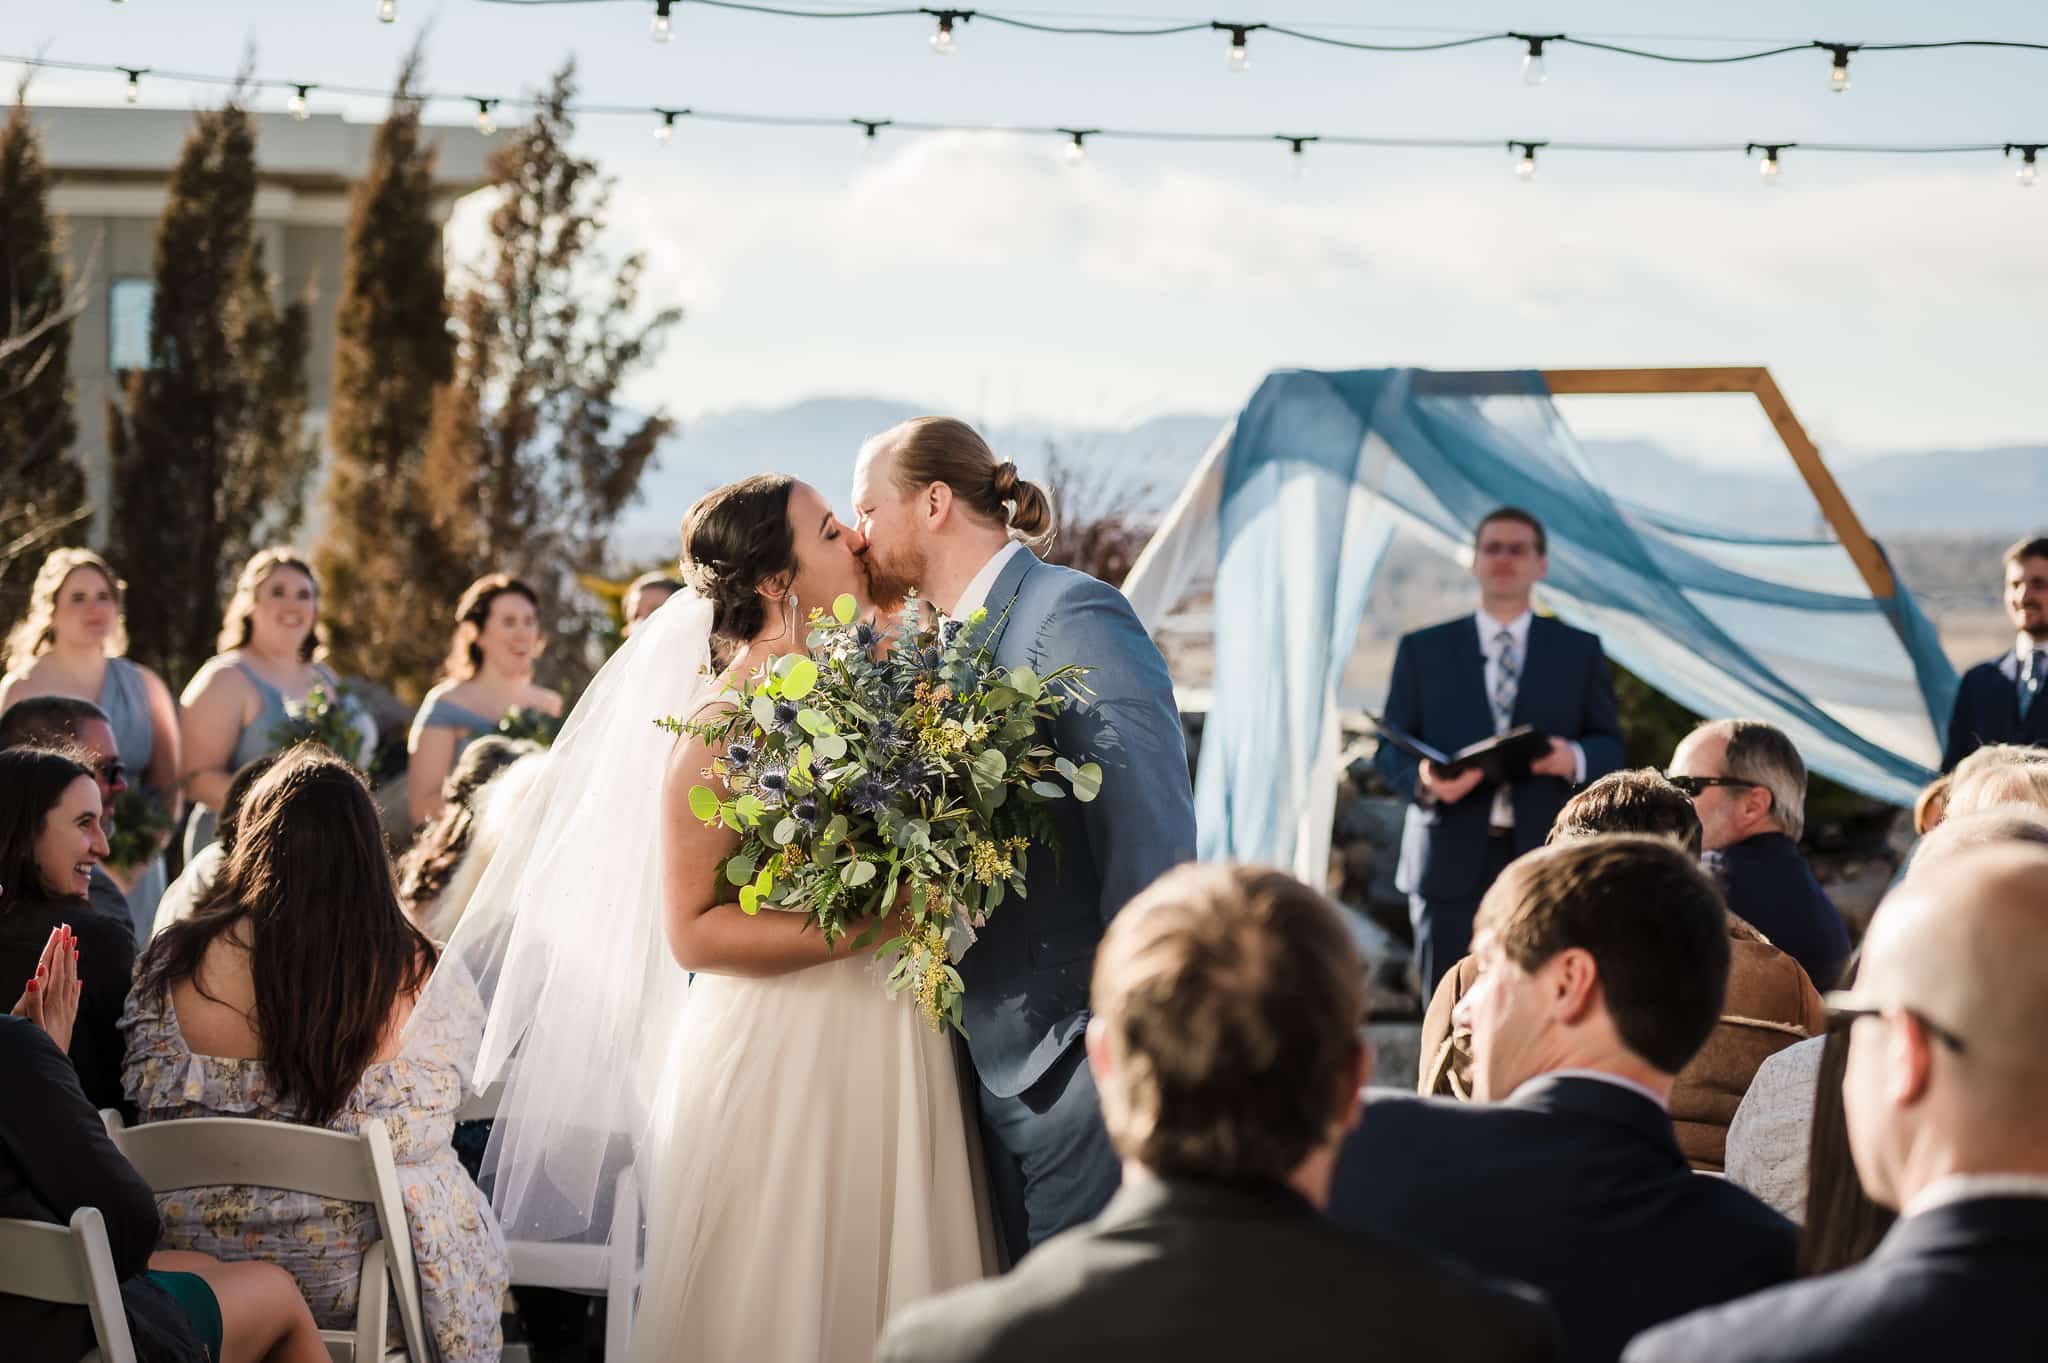 A second first kiss midway down the aisle at this outdoor spring wedding at Ashley Ridge.